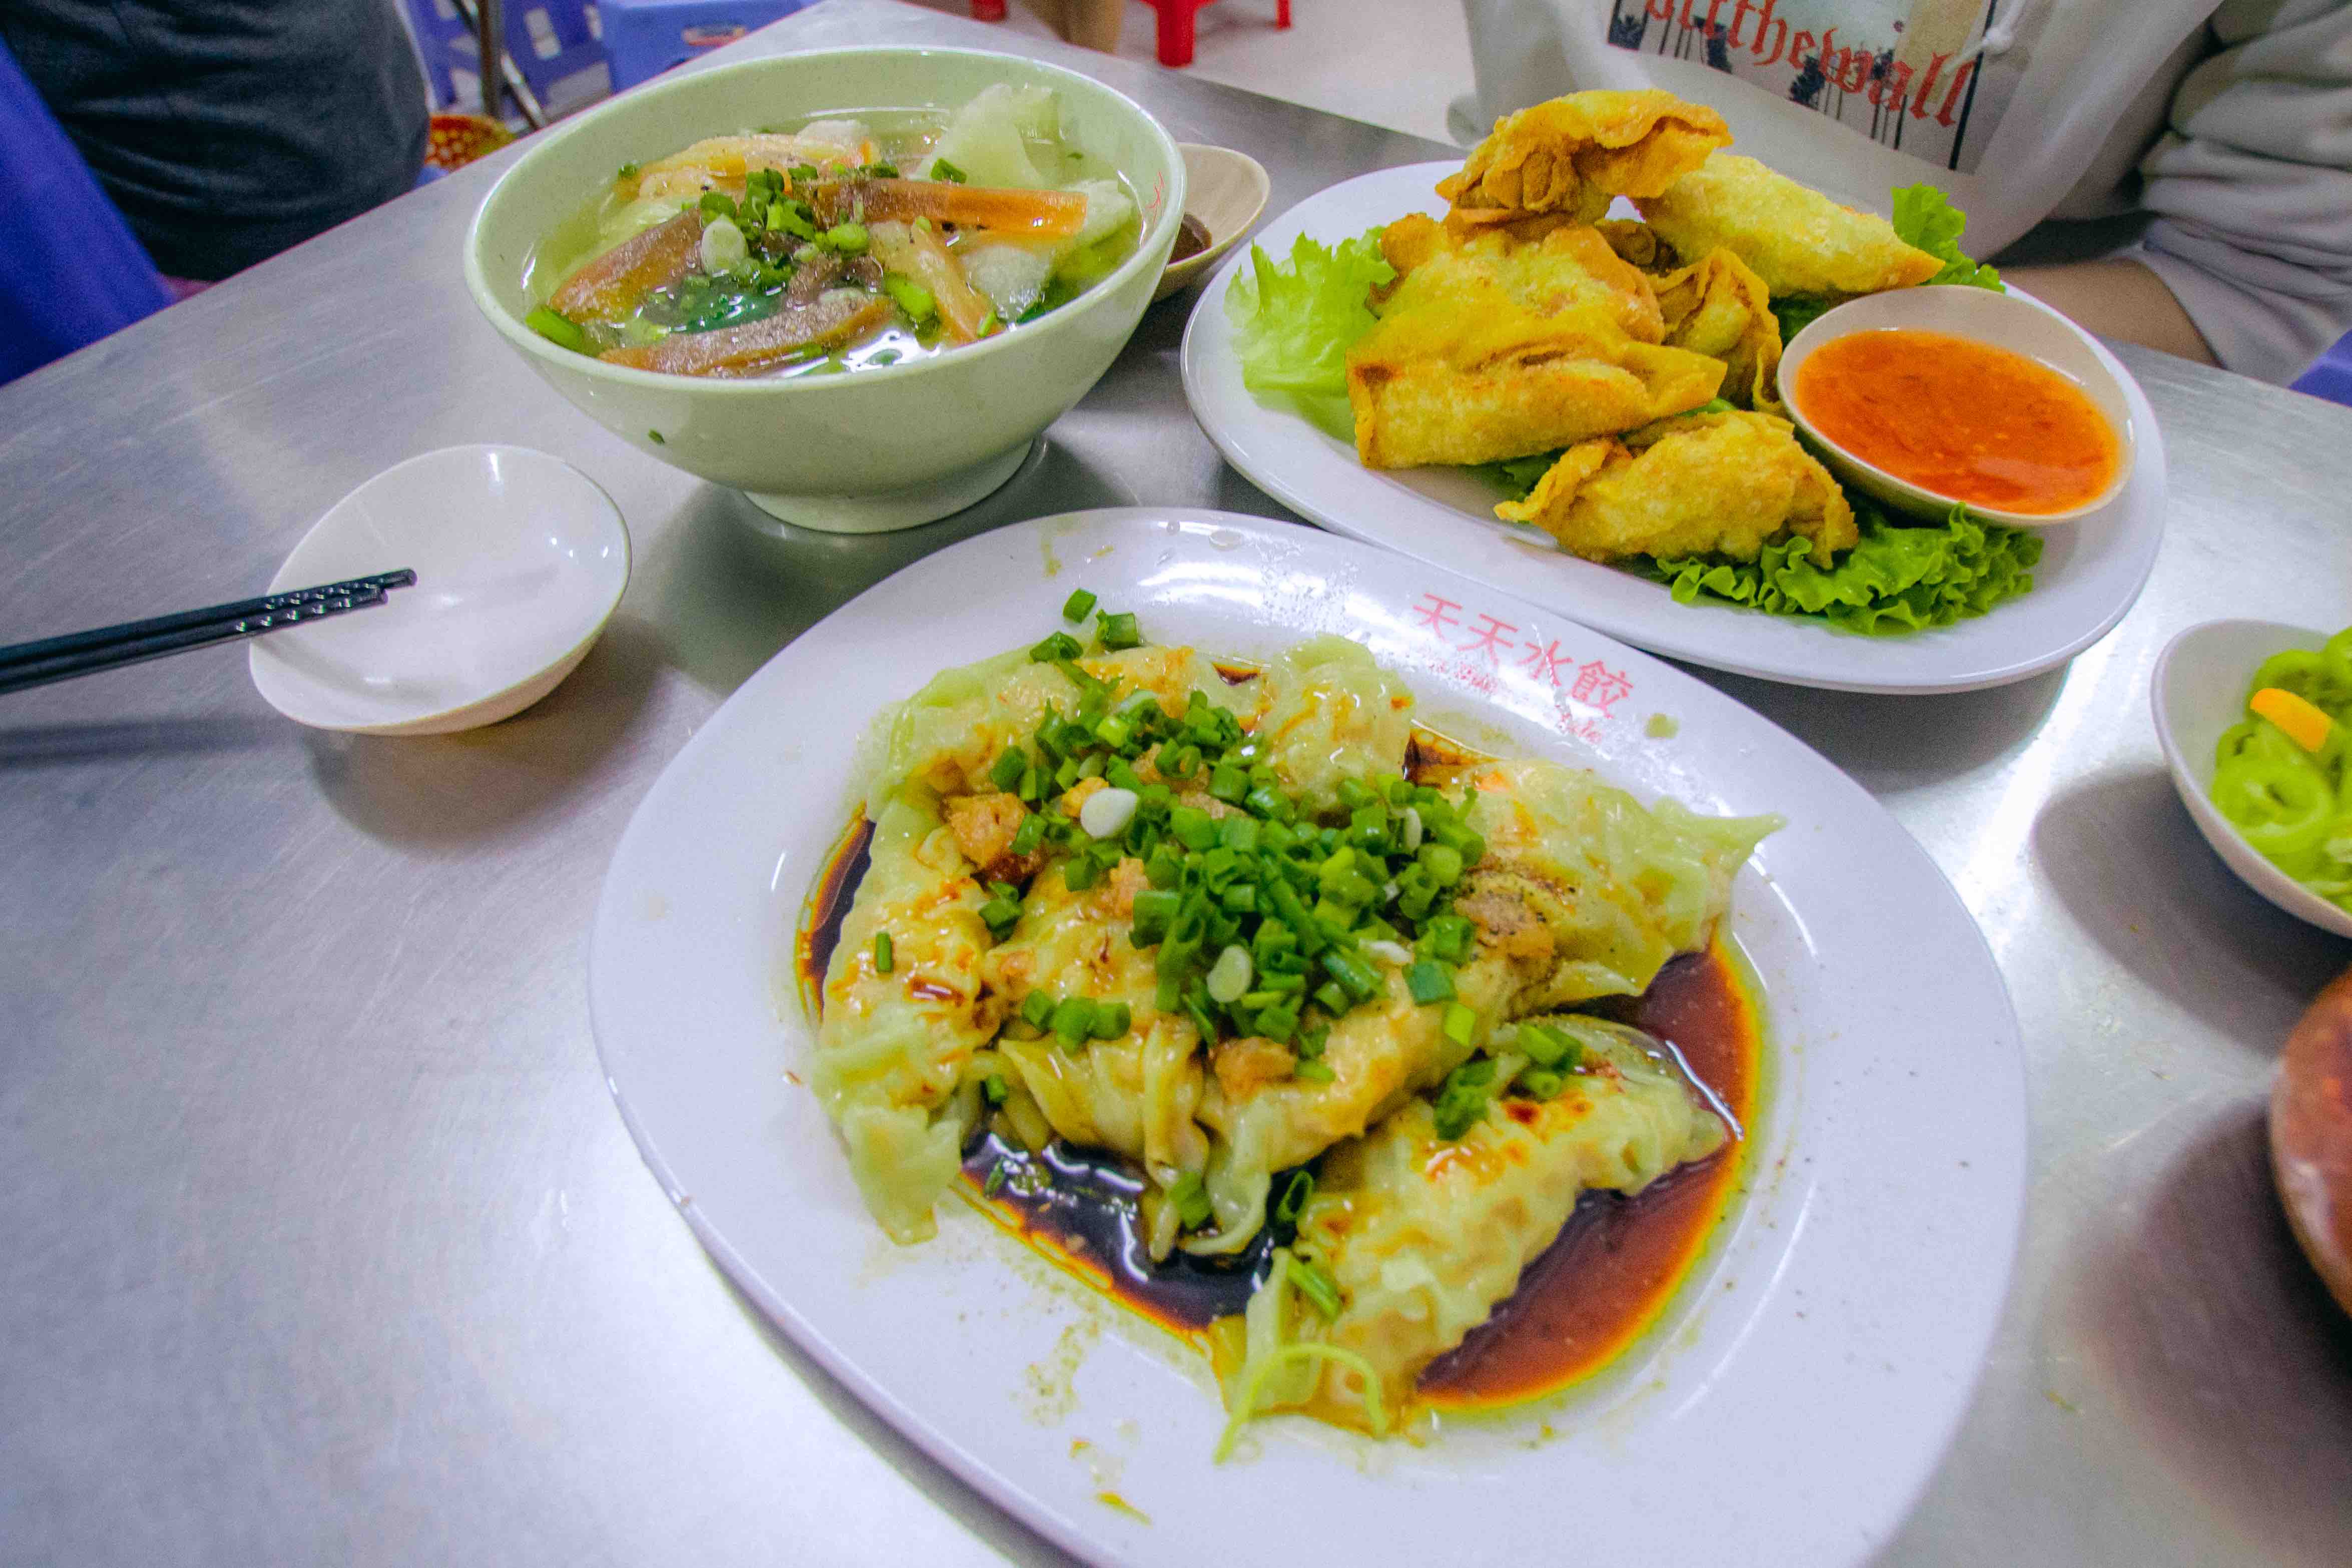 Ho Chi Minh City to host Chinese food fest in Cho Lon next month